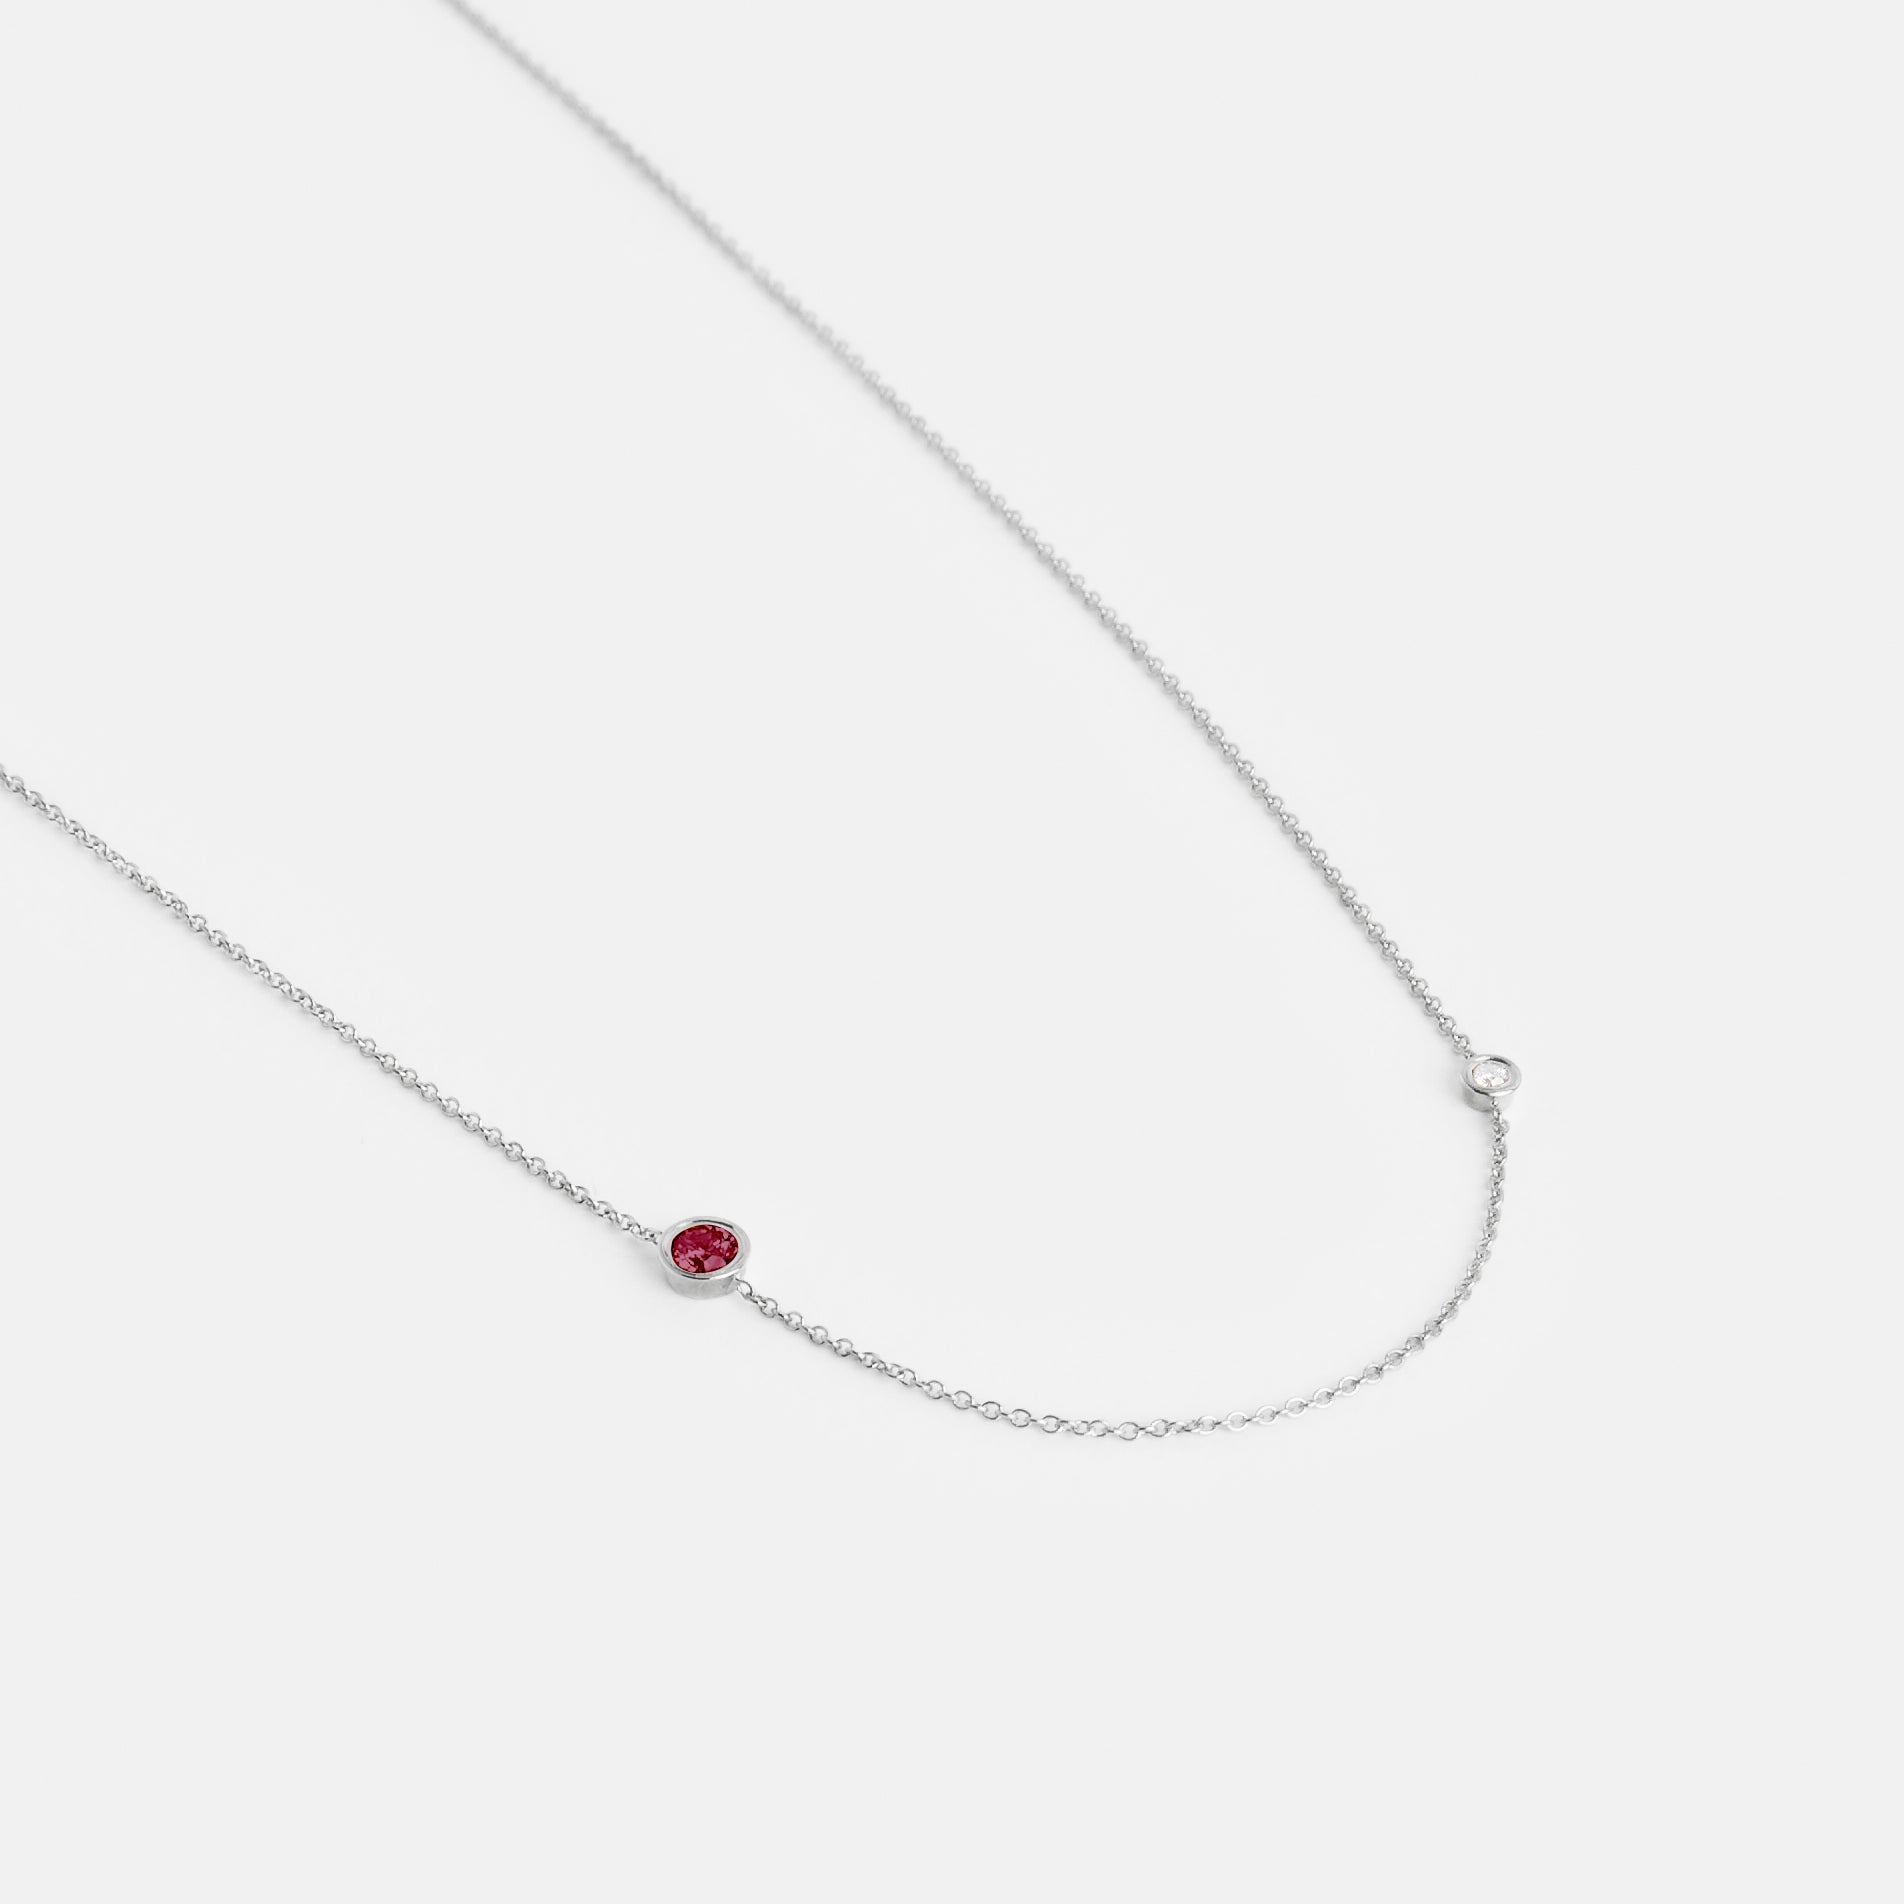 Iba Minimalist Necklace in 14k White Gold set with White Diamond and Ruby By SHW Fine Jewelry NYC